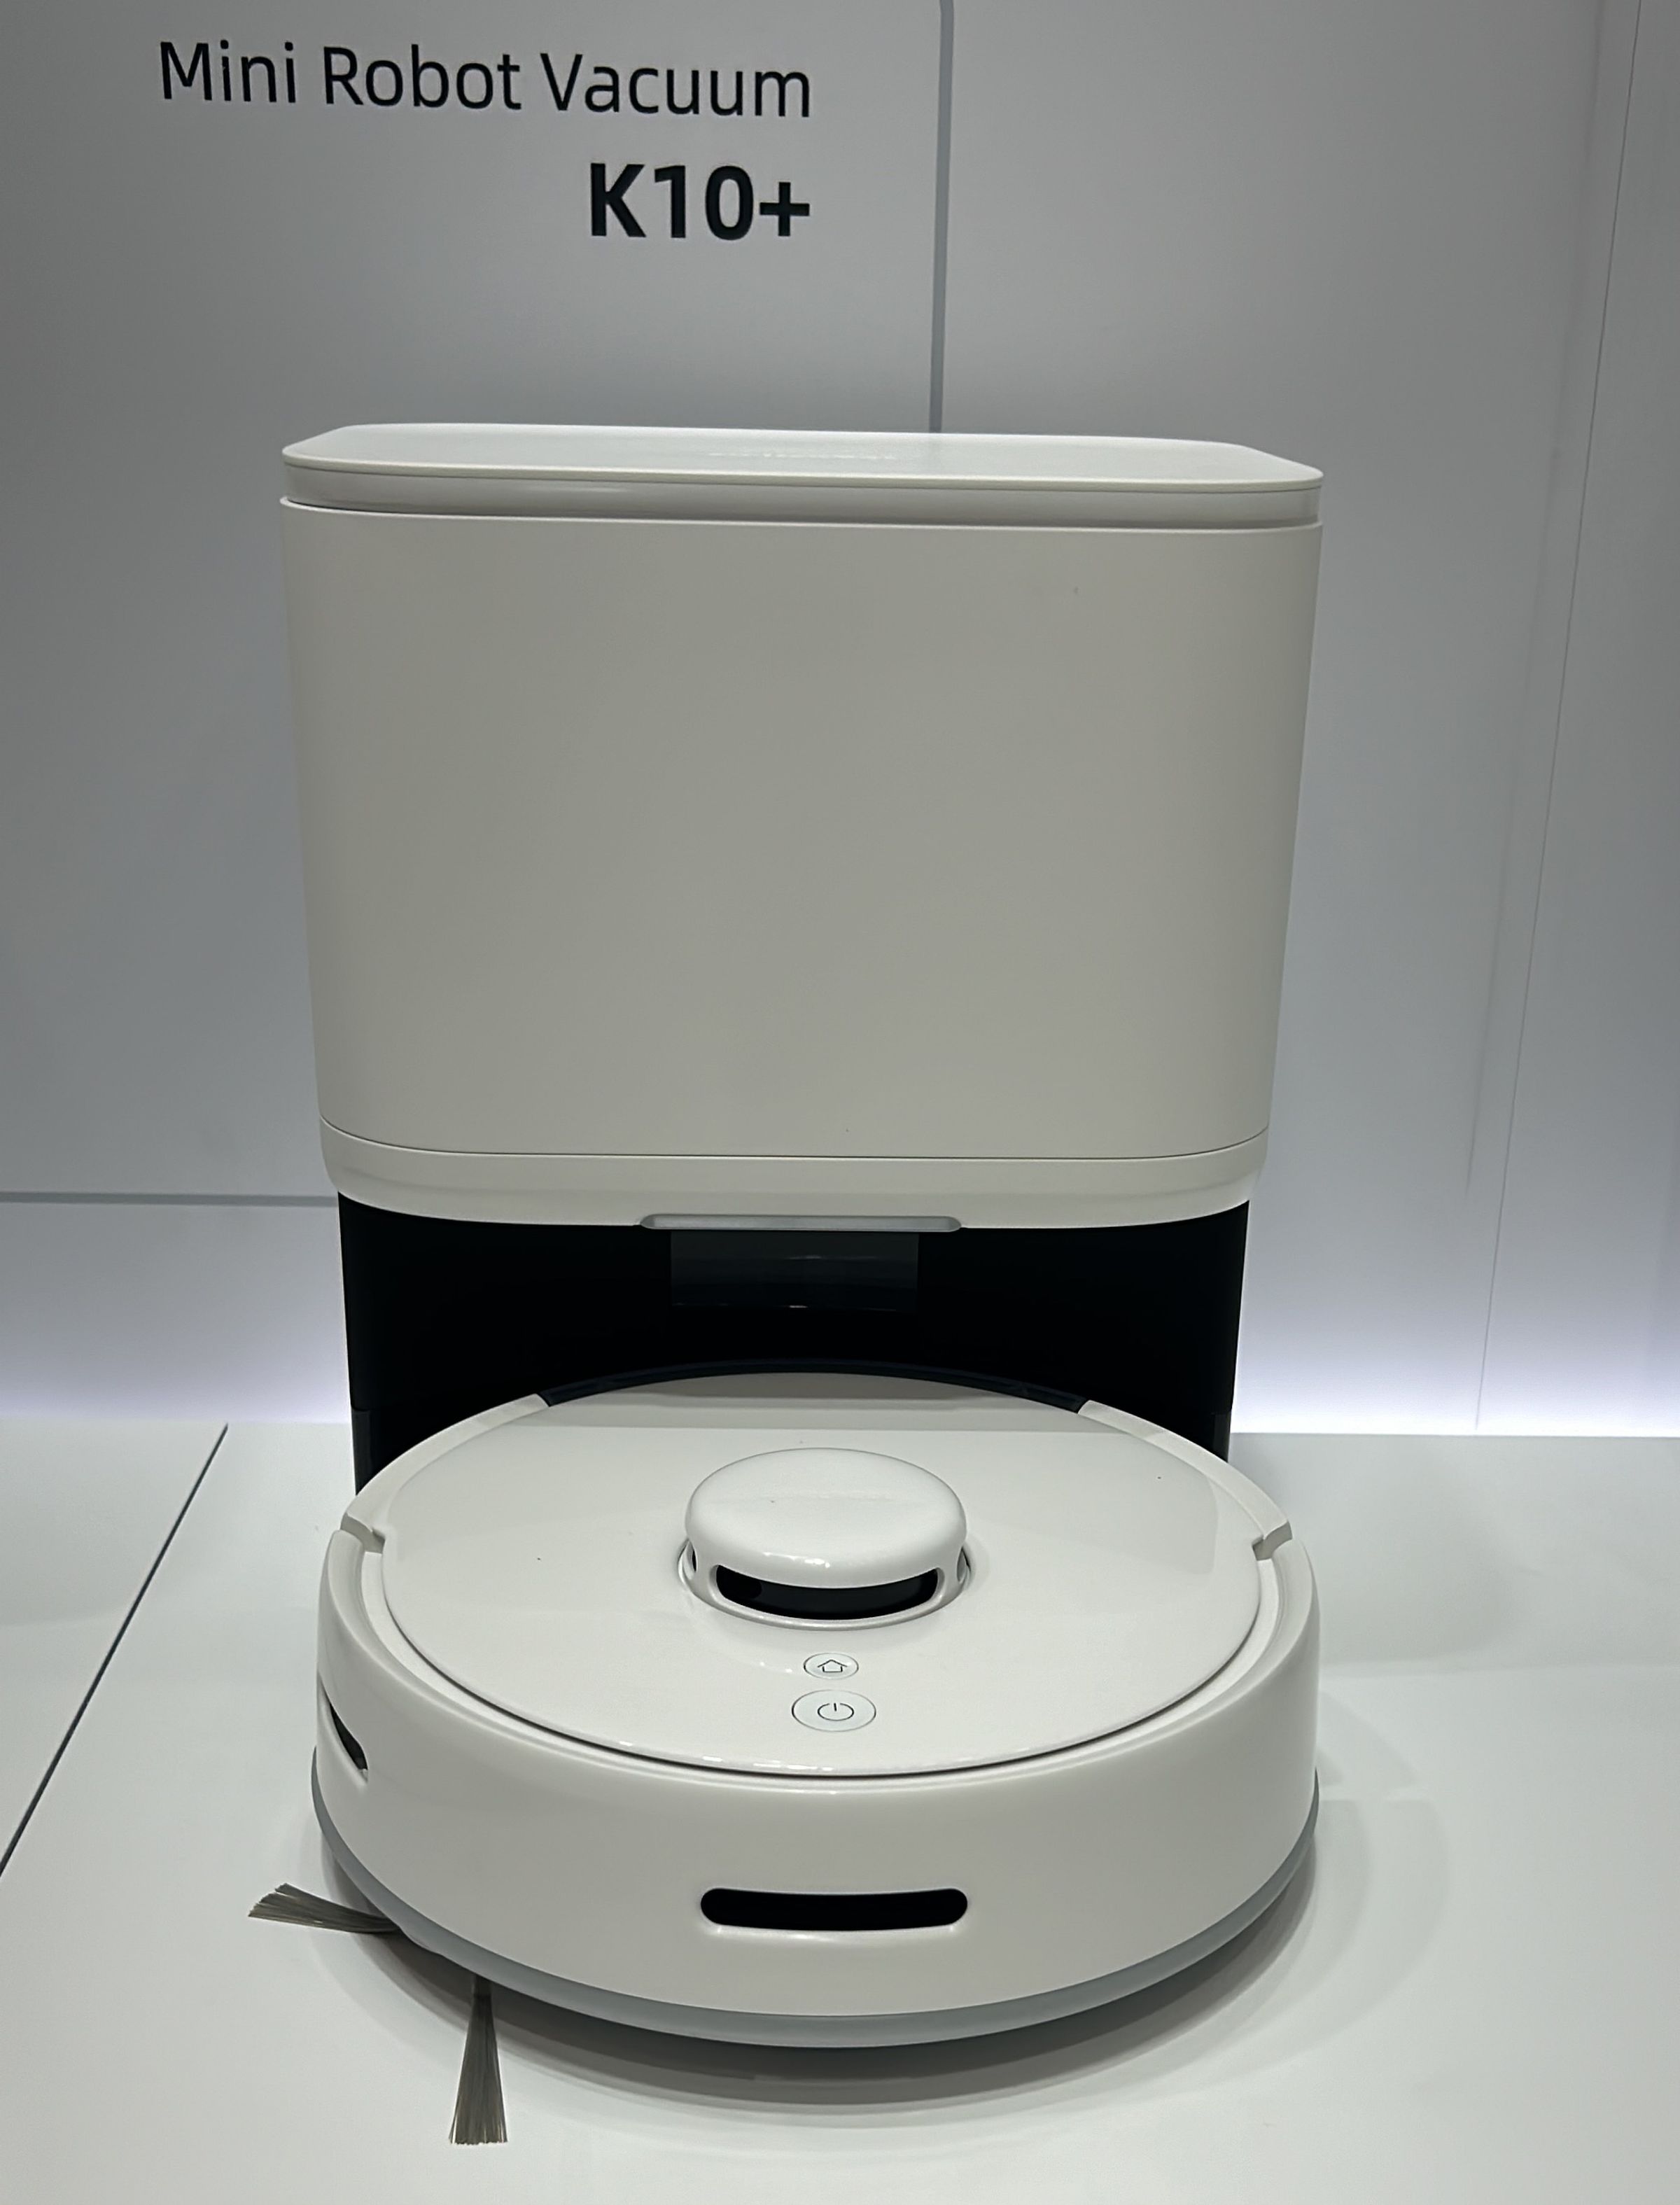 The Switchbot K10 Plus is a compact robot vacuum that will support Matter.